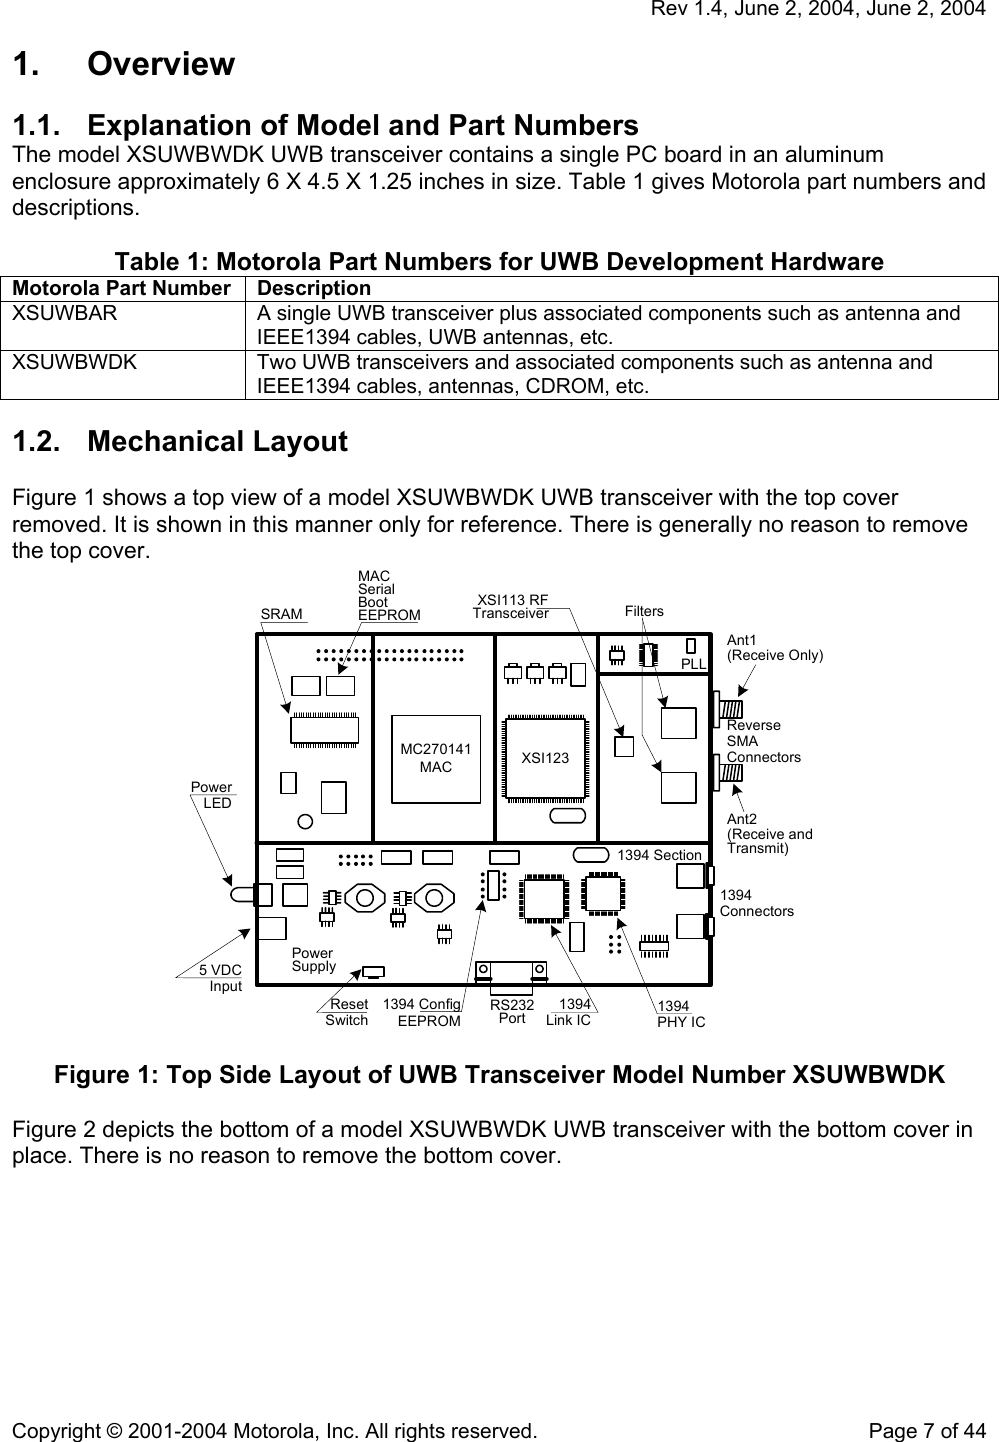   Rev 1.4, June 2, 2004, June 2, 2004 Copyright © 2001-2004 Motorola, Inc. All rights reserved.    Page 7 of 44 1. Overview 1.1.  Explanation of Model and Part Numbers The model XSUWBWDK UWB transceiver contains a single PC board in an aluminum enclosure approximately 6 X 4.5 X 1.25 inches in size. Table 1 gives Motorola part numbers and descriptions.  Table 1: Motorola Part Numbers for UWB Development Hardware Motorola Part Number  Description XSUWBAR  A single UWB transceiver plus associated components such as antenna and IEEE1394 cables, UWB antennas, etc. XSUWBWDK  Two UWB transceivers and associated components such as antenna and IEEE1394 cables, antennas, CDROM, etc. 1.2. Mechanical Layout  Figure 1 shows a top view of a model XSUWBWDK UWB transceiver with the top cover removed. It is shown in this manner only for reference. There is generally no reason to remove the top cover. ReverseSMAConnectorsXSI123MC270141MAC1394 SectionPowerSupplyRS232Port1394 ConfigEEPROM1394Link IC1394PHY ICMACSerialBootEEPROMXSI113 RFTransceiver FiltersPLL1394ConnectorsSRAMResetSwitchPowerLED5 VDCInputAnt1(Receive Only)Ant2(Receive andTransmit)  Figure 1: Top Side Layout of UWB Transceiver Model Number XSUWBWDK  Figure 2 depicts the bottom of a model XSUWBWDK UWB transceiver with the bottom cover in place. There is no reason to remove the bottom cover.  